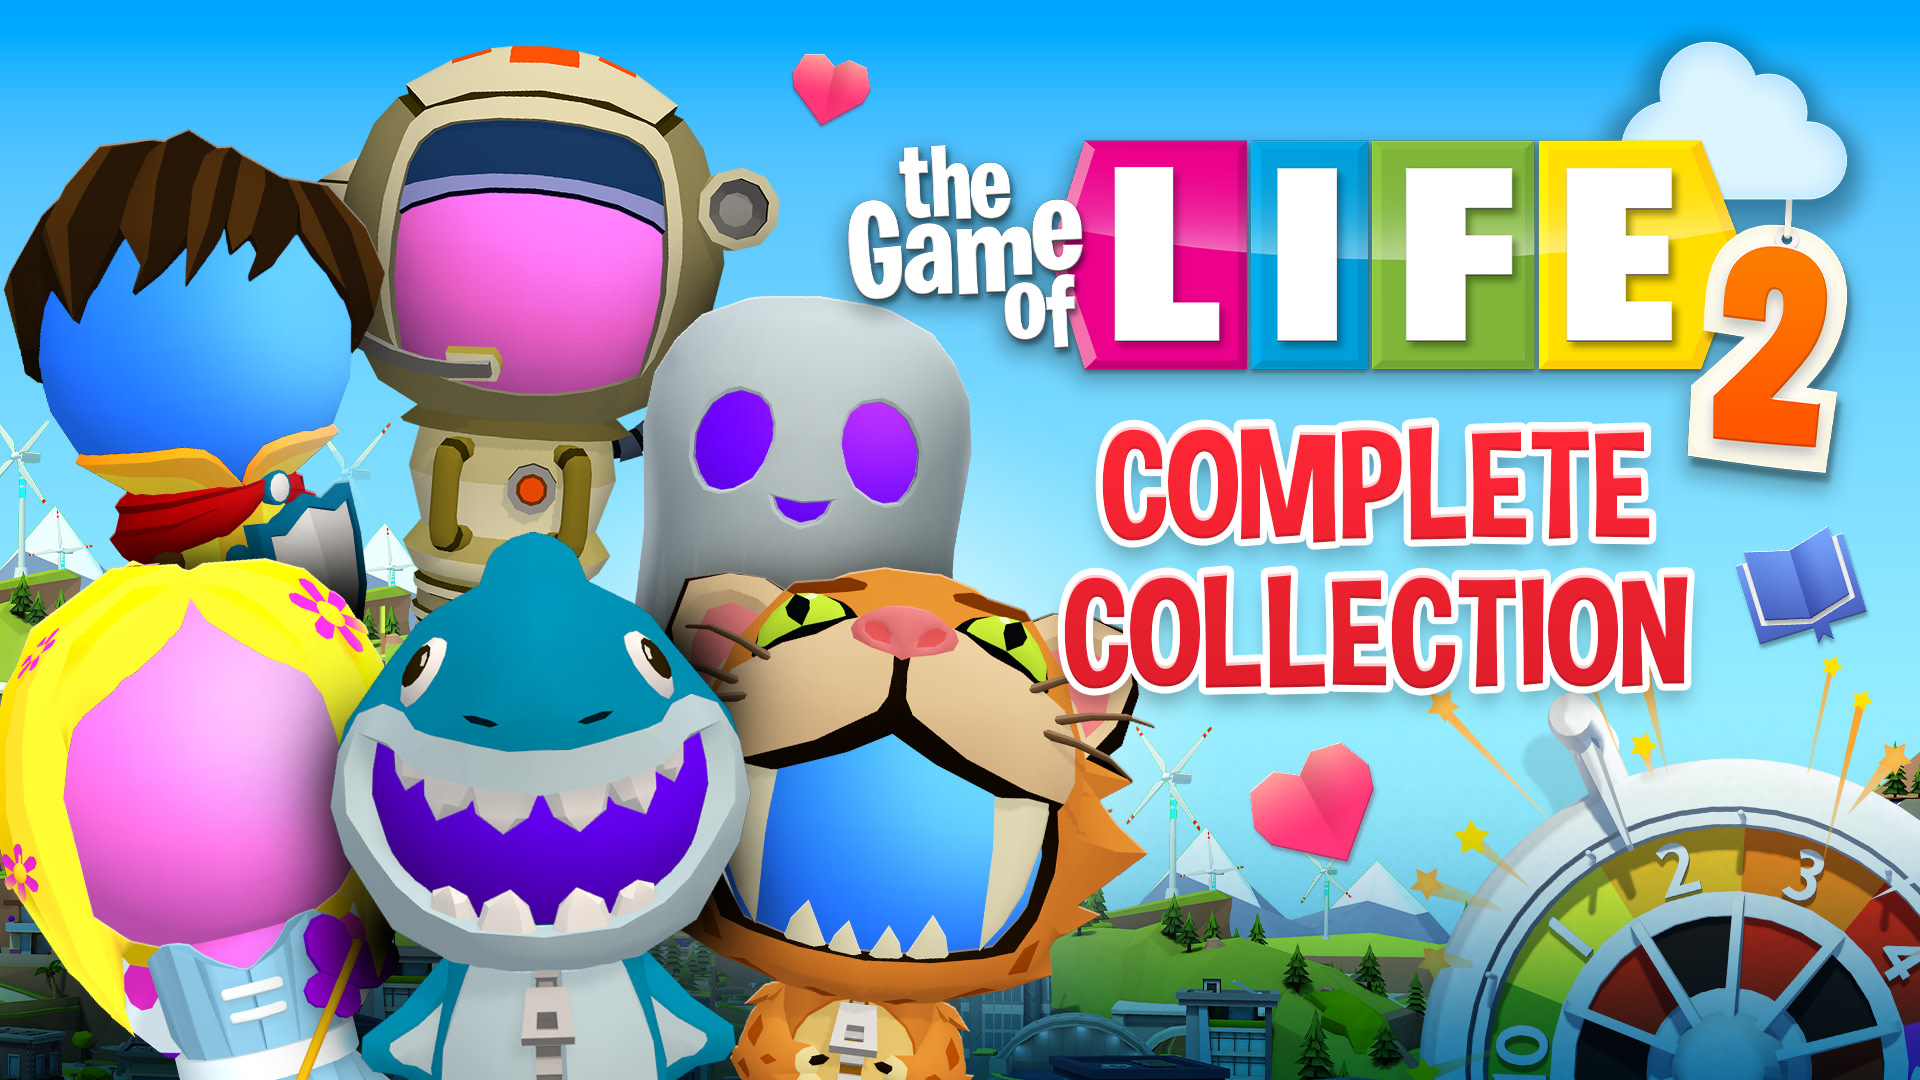 THE GAME OF LIFE 2 - Complete Collection